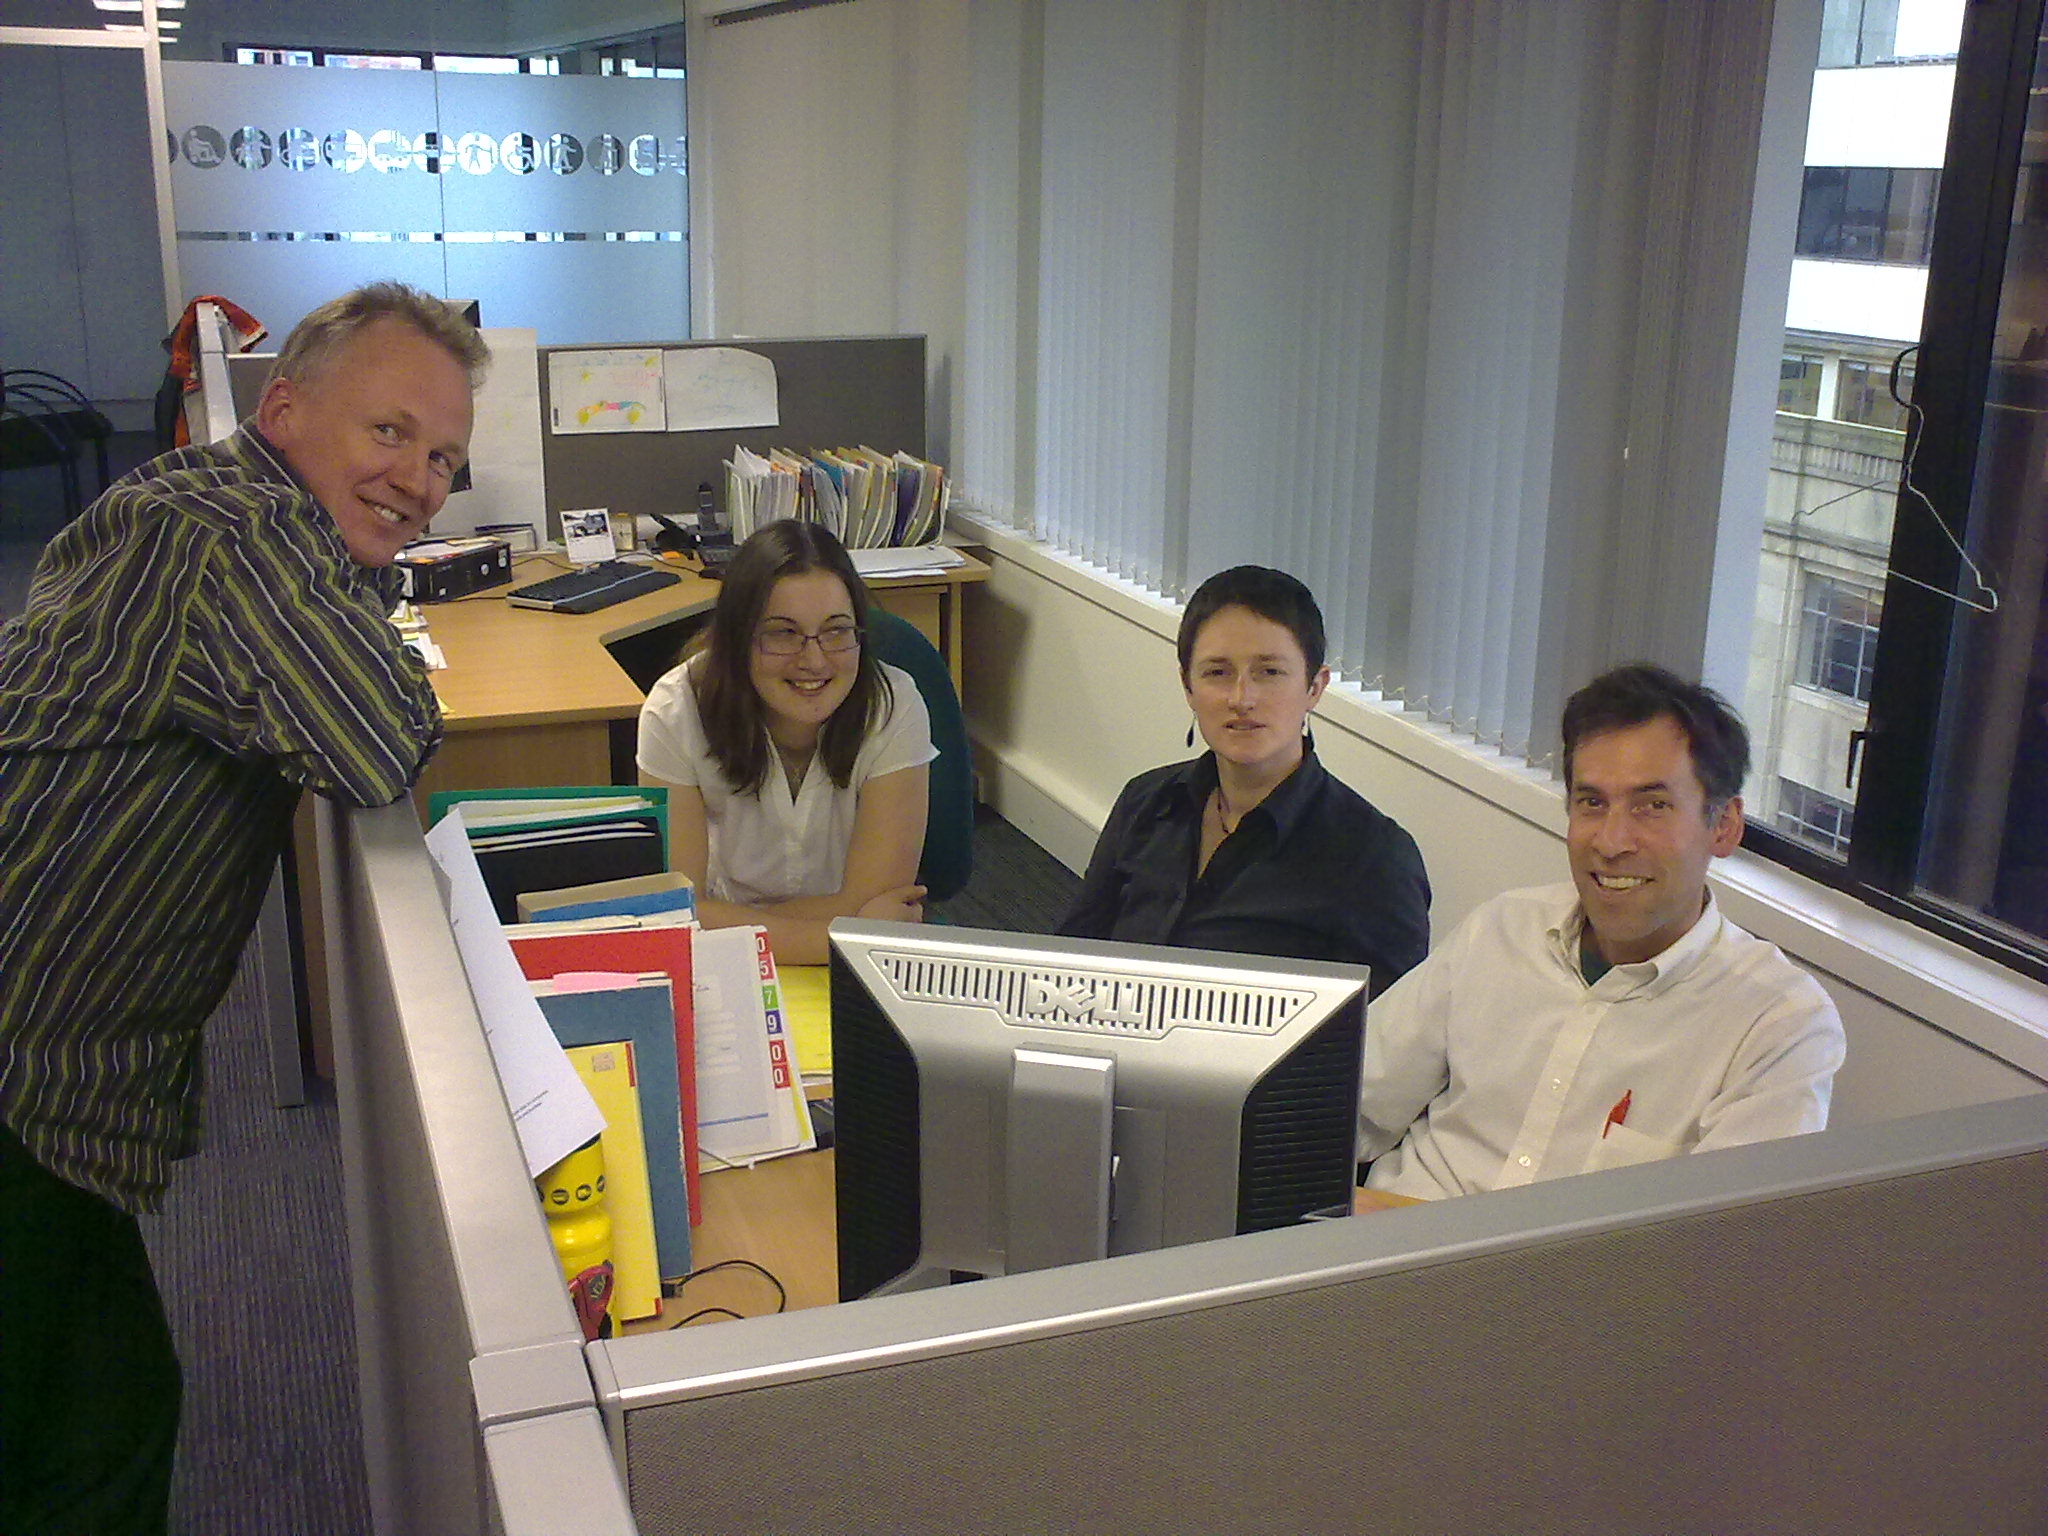 Axel (left), Megan, Jeanette and John work on a project together in the ViaStrada Christchurch office (October 2009)